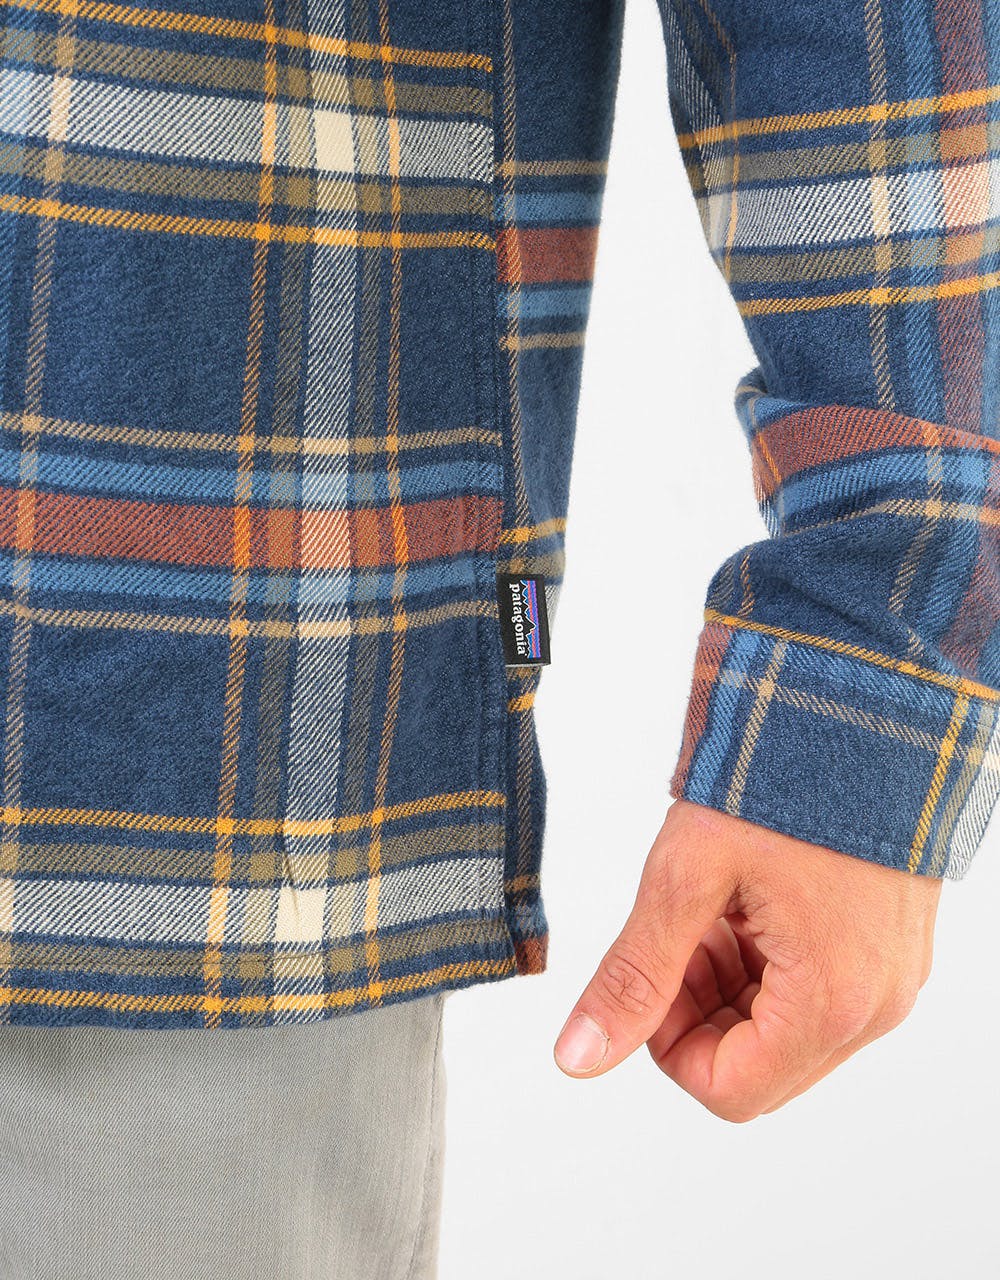 Patagonia L/S Fjord Flannel Shirt - Defender: Neo Navy